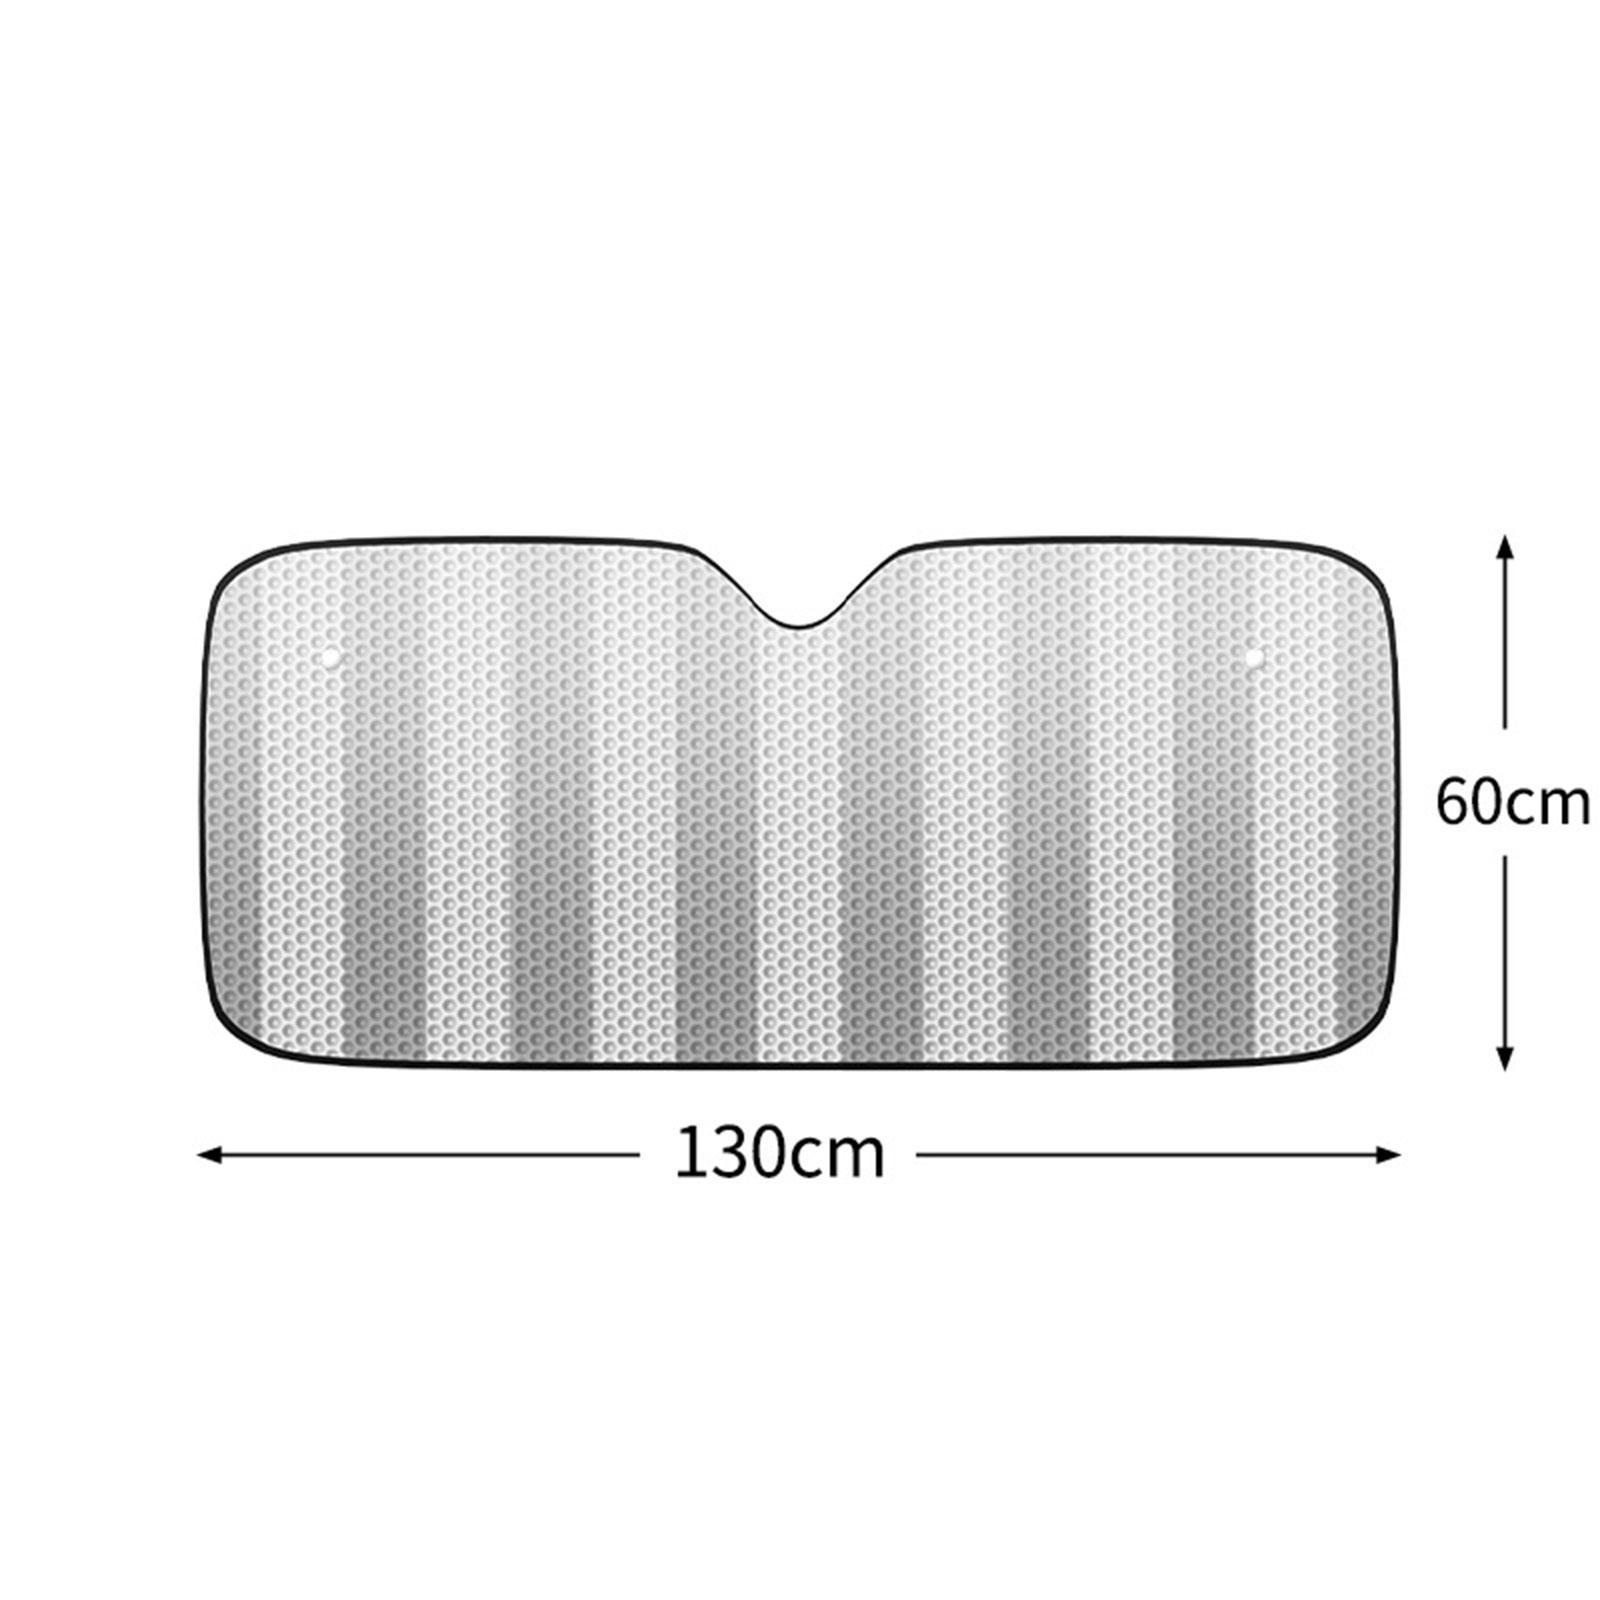 Front Window Car Sun Shades Windshield Sunshade Keeps Vehicle Cool Portable Cling Sunshade for Car Windows for Business Car Compact Car